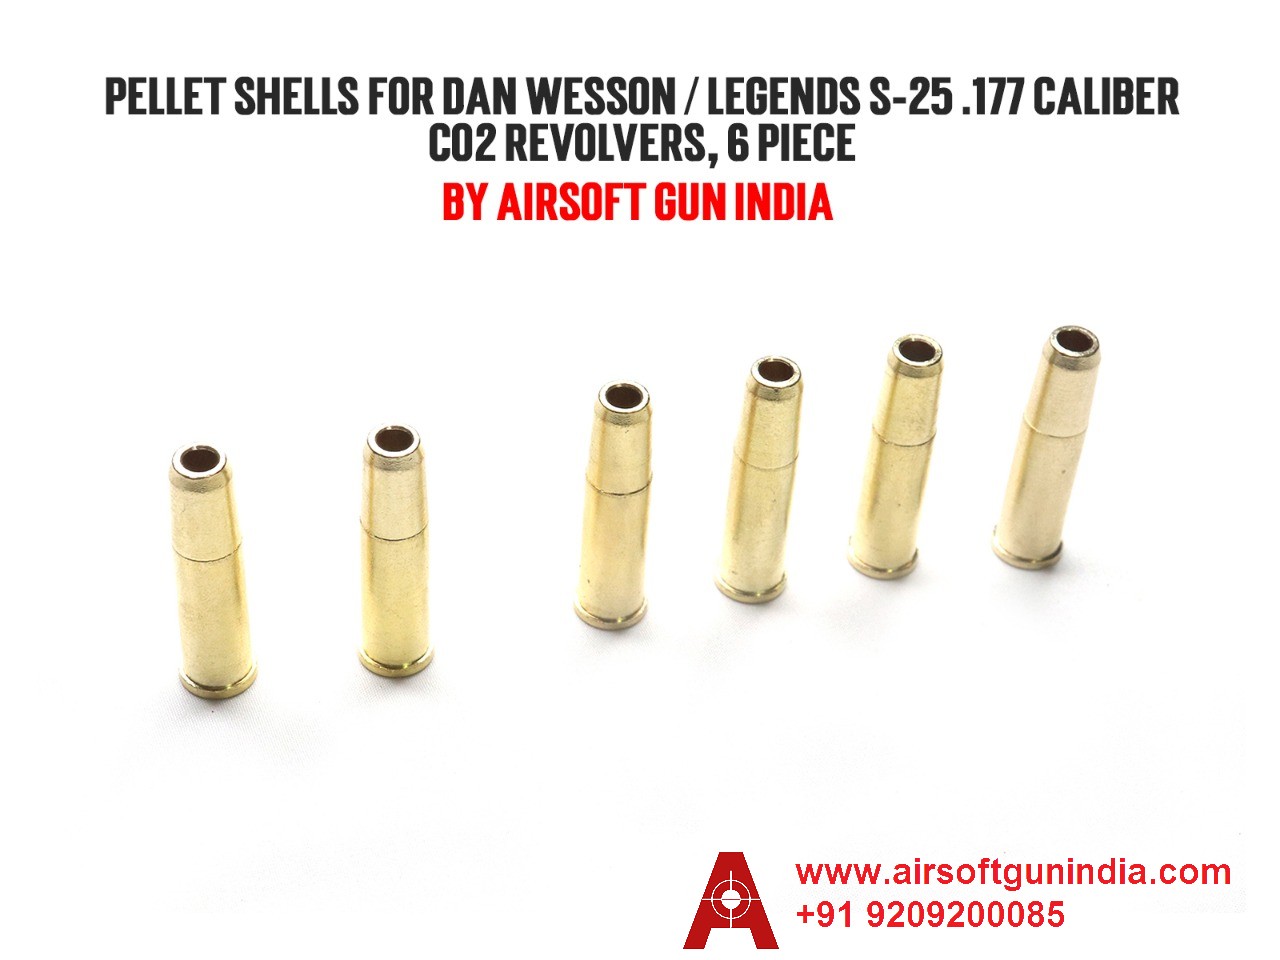 Pellet Shells For Dan Wesson / Legends S-25 .177 Caliber Co2 Revolvers, 6 Piece By Airsoft Gun India